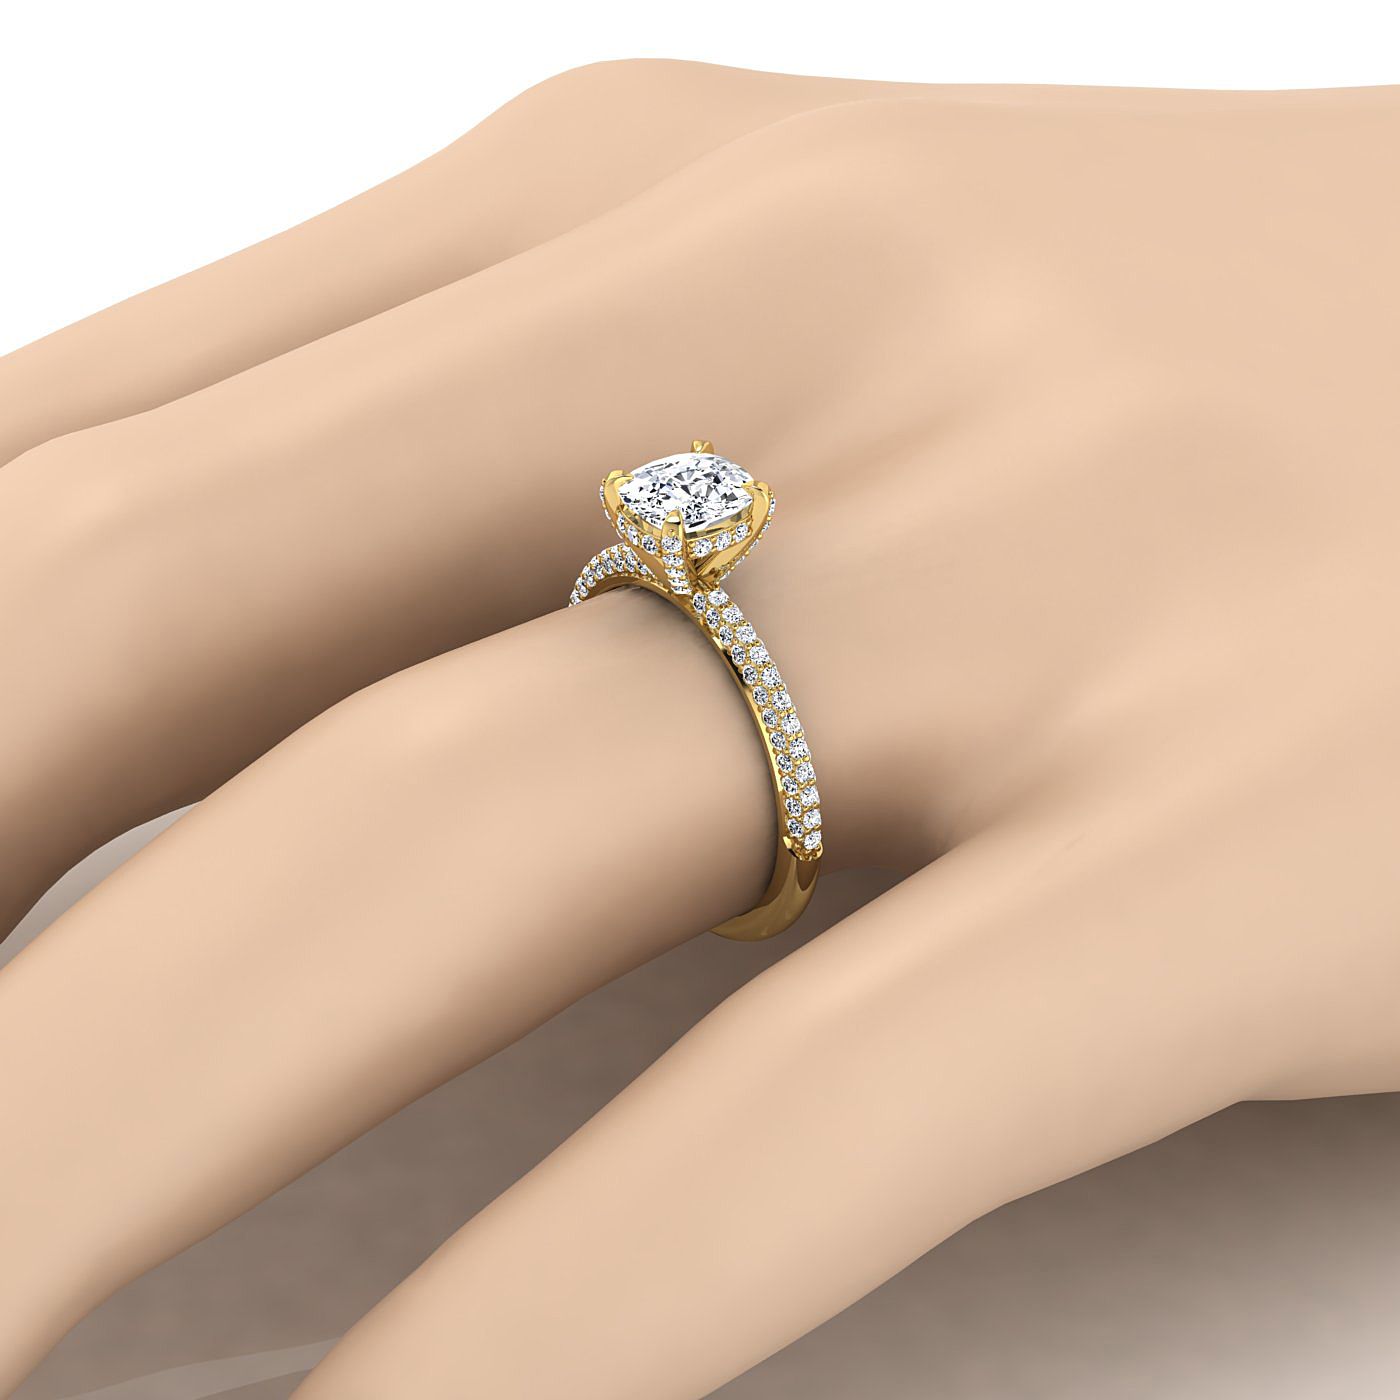 14K Yellow Gold Cushion Diamond Encrusted Claws and Triple Pave Engagement Ring -1/2ctw